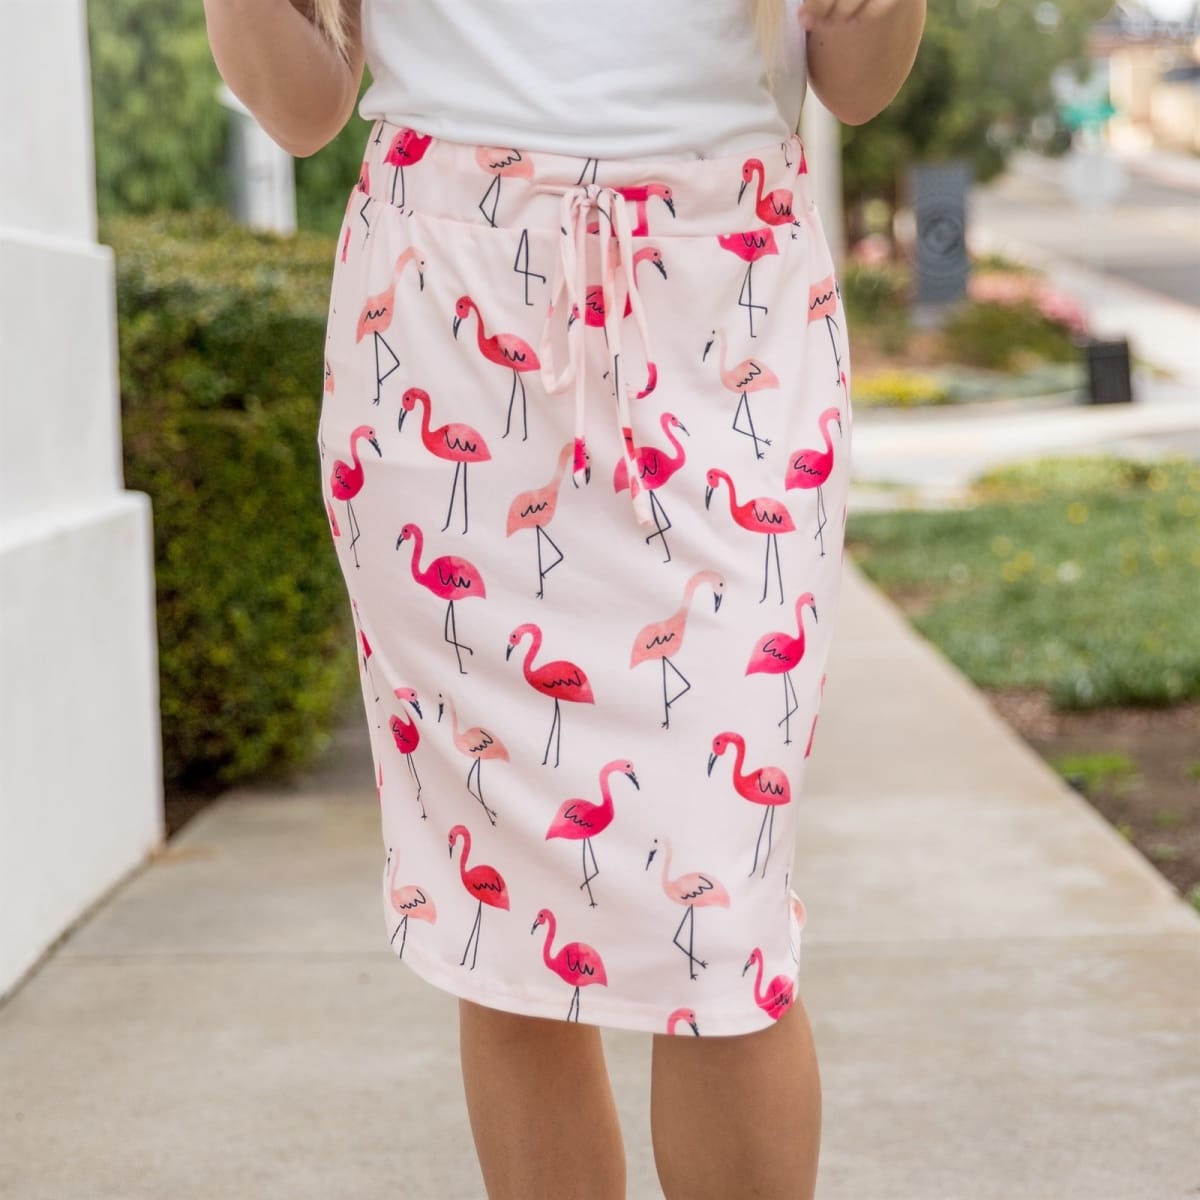 Pattern Weekend Skirt Only $12.99!